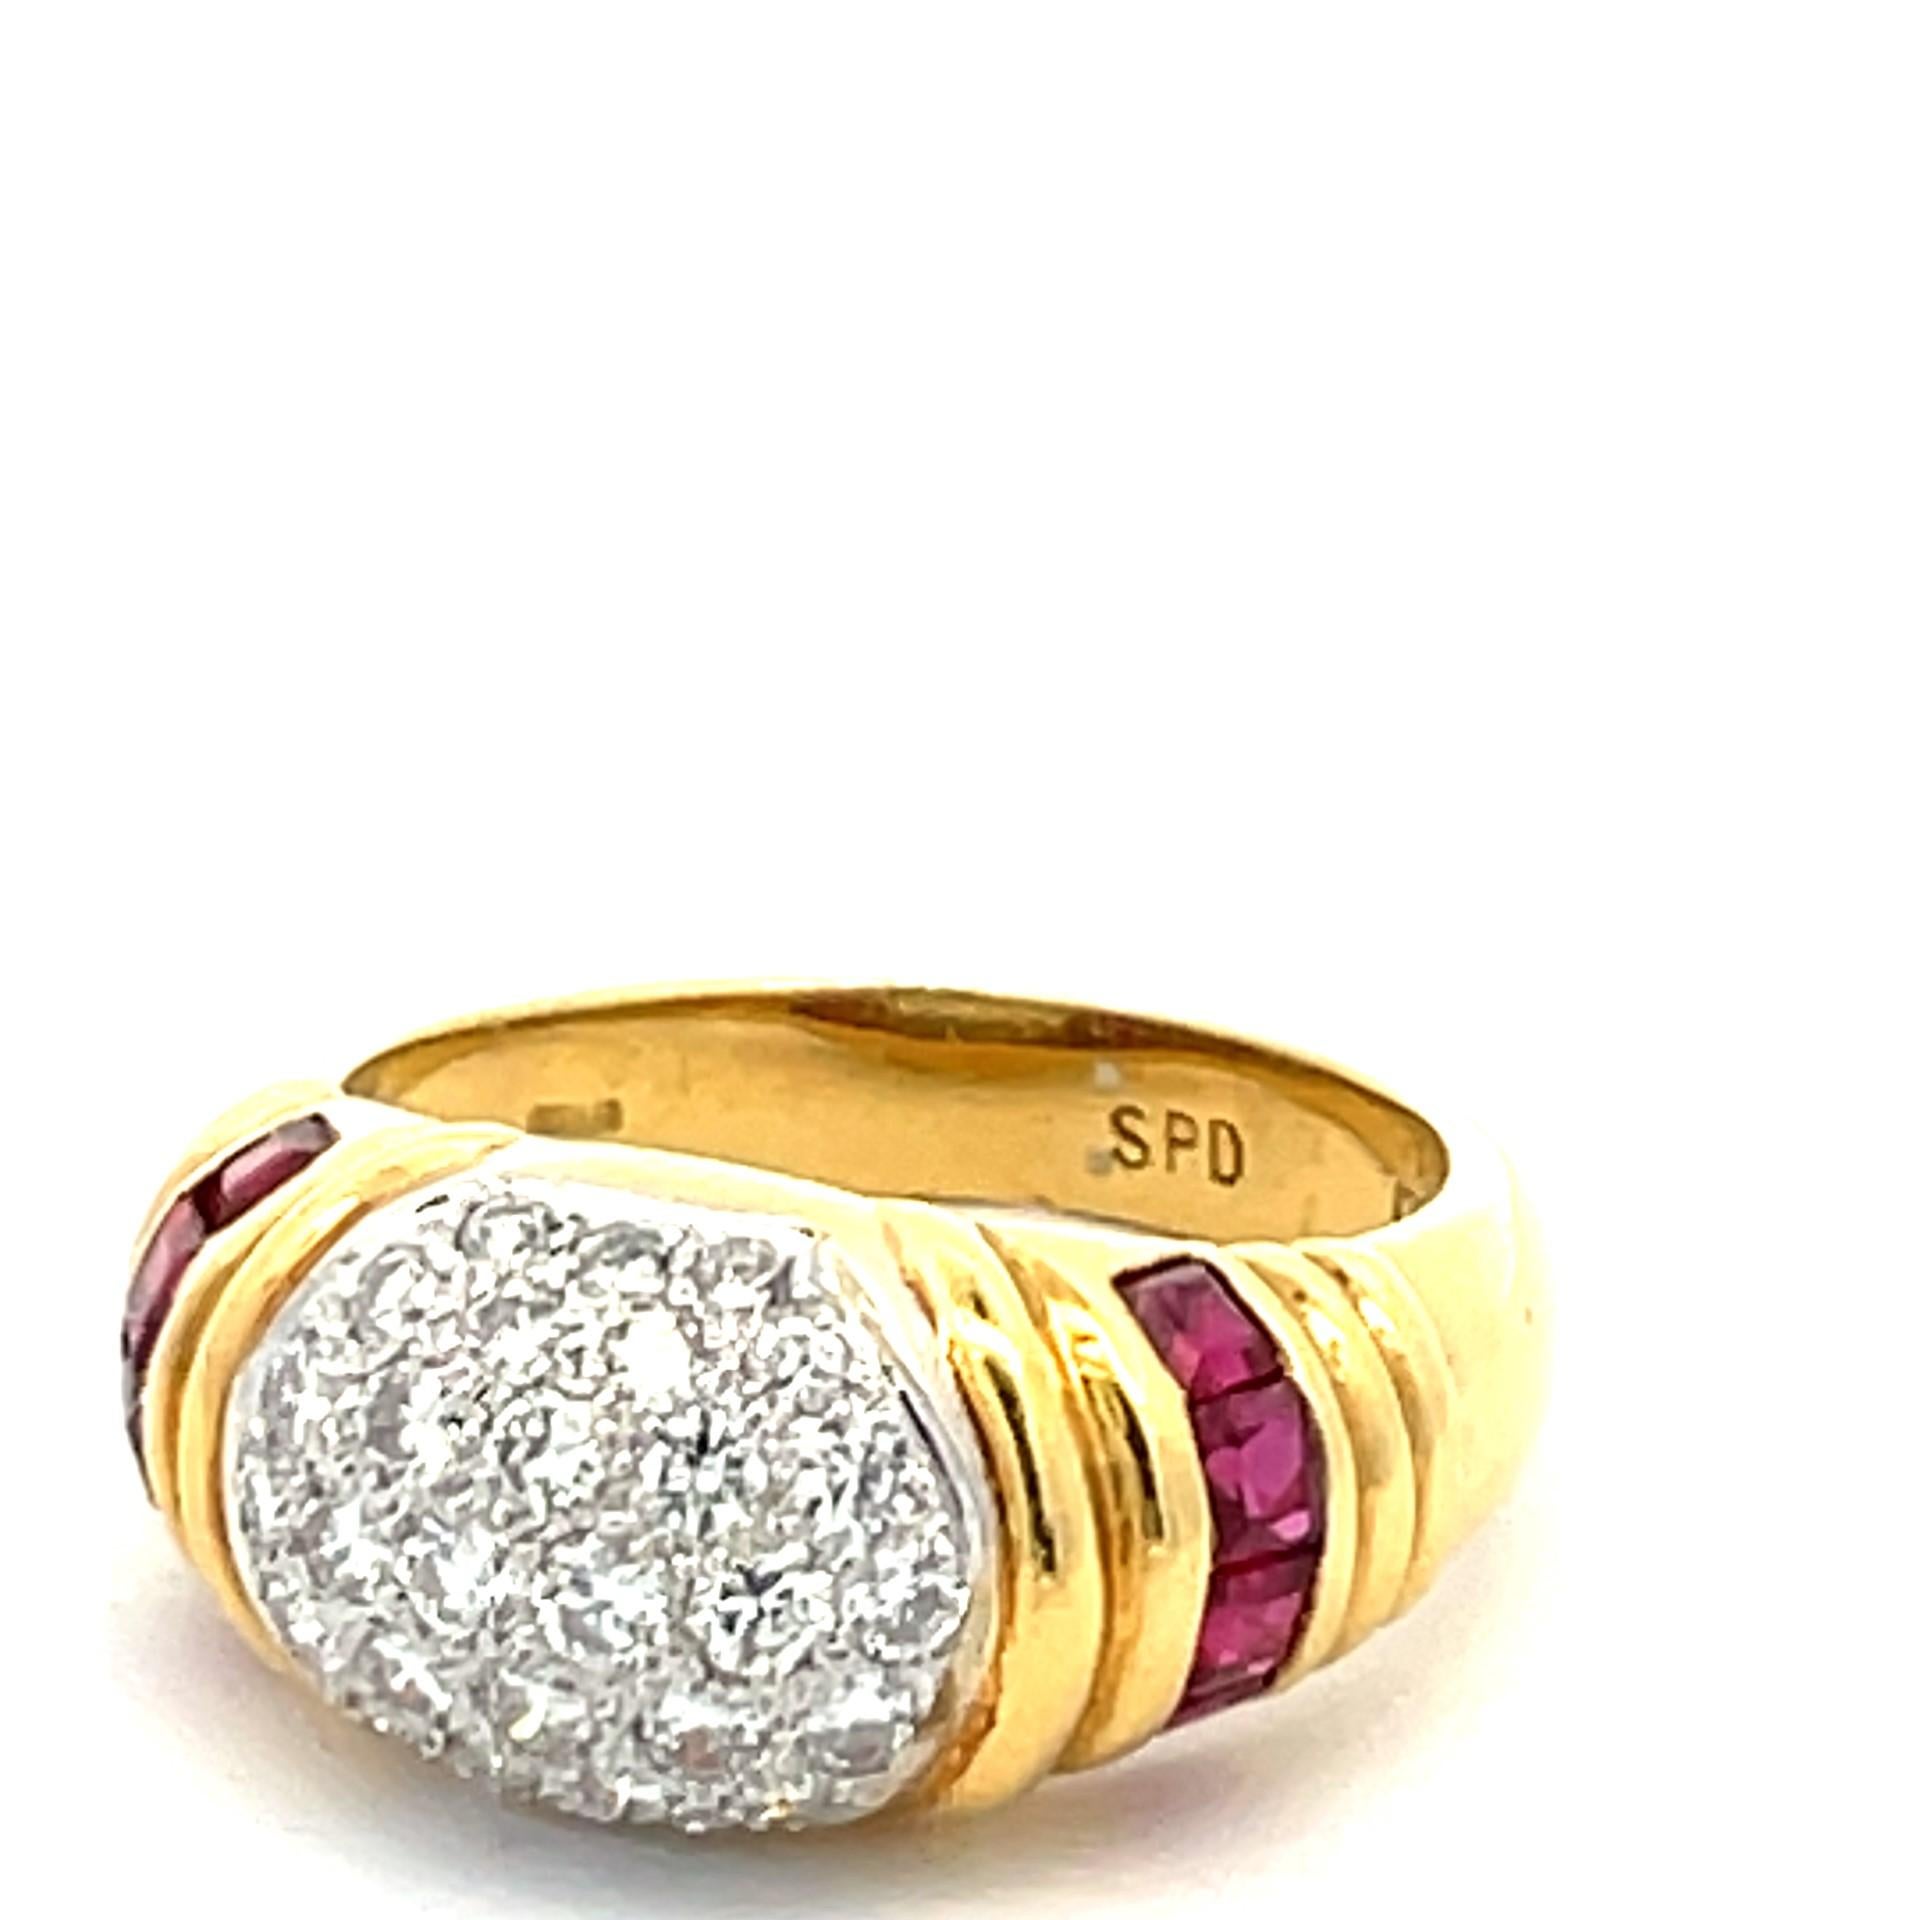 Gorgeous pave dome ring with natural princess cut red ruby and white diamond in 18 karat yellow gold.

8 princess cut ruby 0.90ct total weight

30 brilliant cut natural diamonds 0.75ct total weight

18kt white gold weighing 8 grams

Stamped SPD &